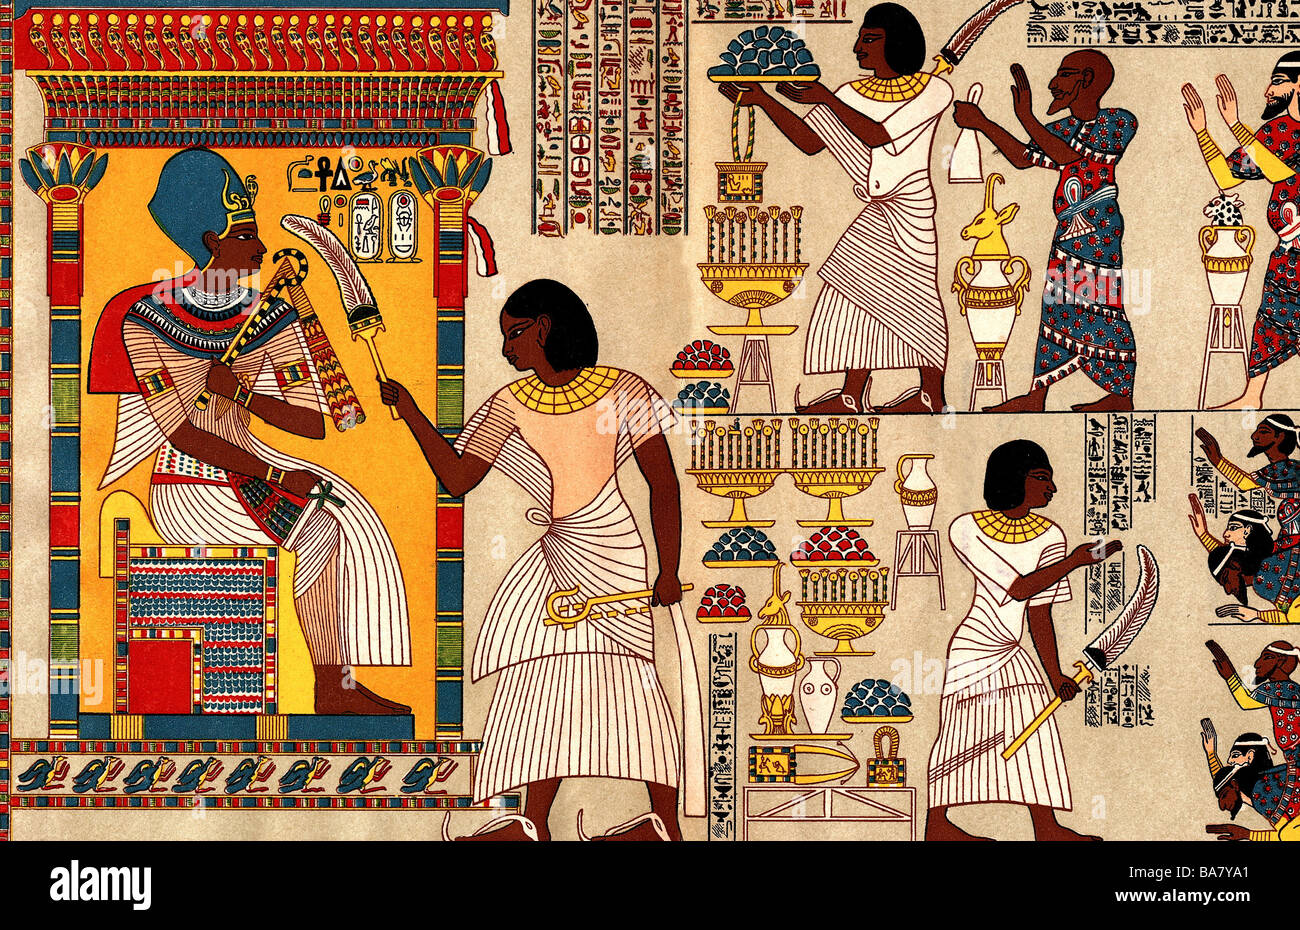 Tutankhamun, King of Egypt, 1333 - 1323 BC, 18th Dynasty, scene, receiving tributes from Syria, in front of him the state official Hui, colour print, Germany, 19th century, after mural painting from Hui's grave, Stock Photo